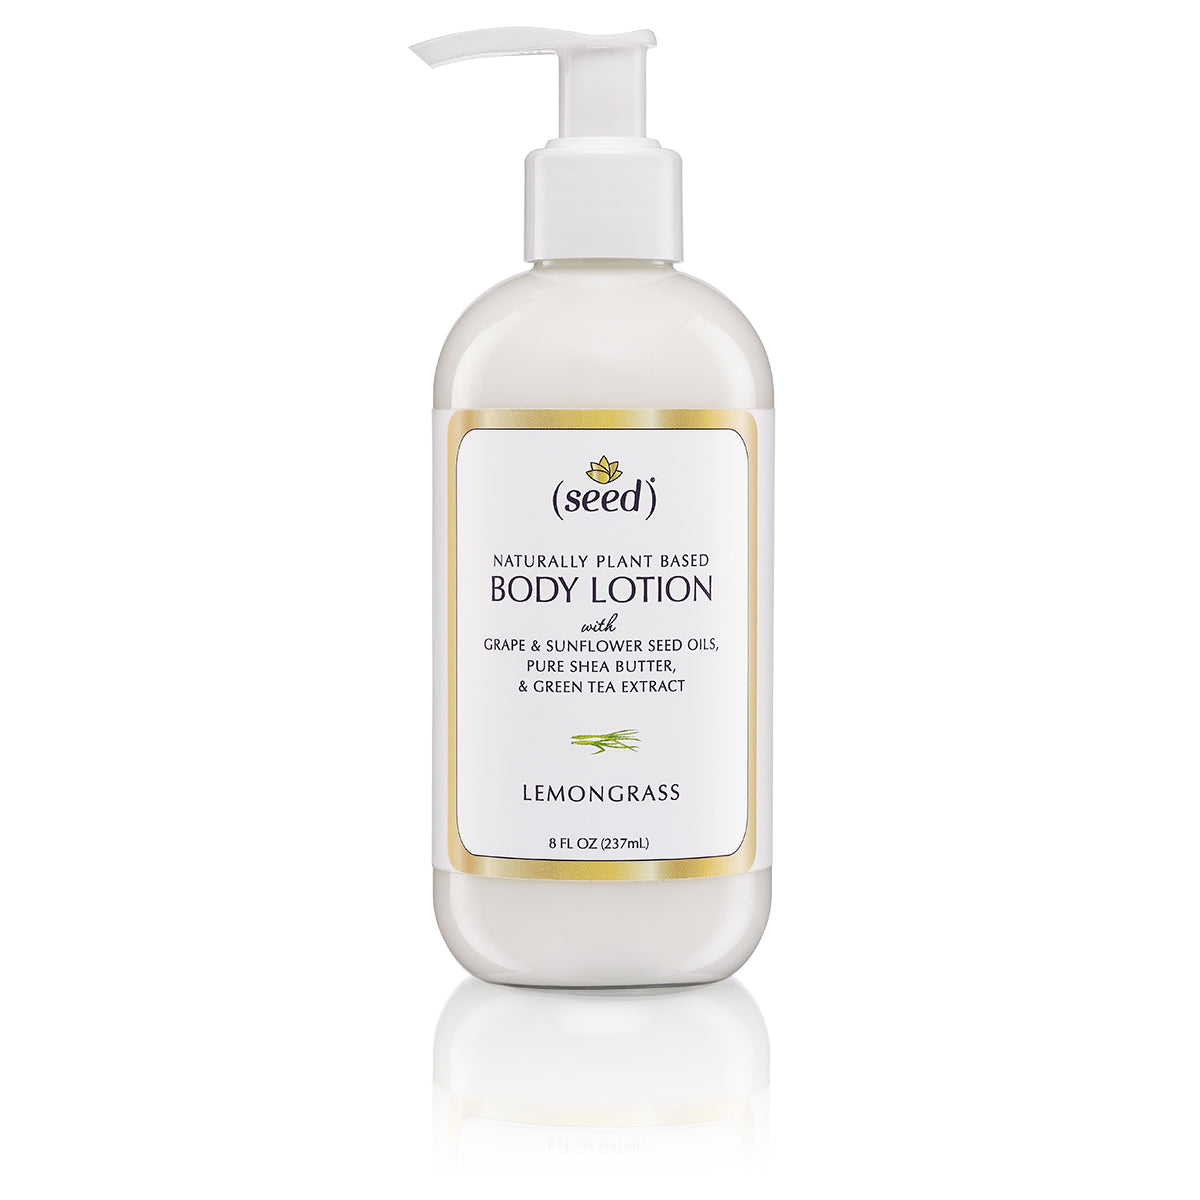 Seed Lemongrass Body Lotion with Grape and Sunflower Seed Oils, Shea Butter and Green Tea Extract, Lemongrass Essential Oil